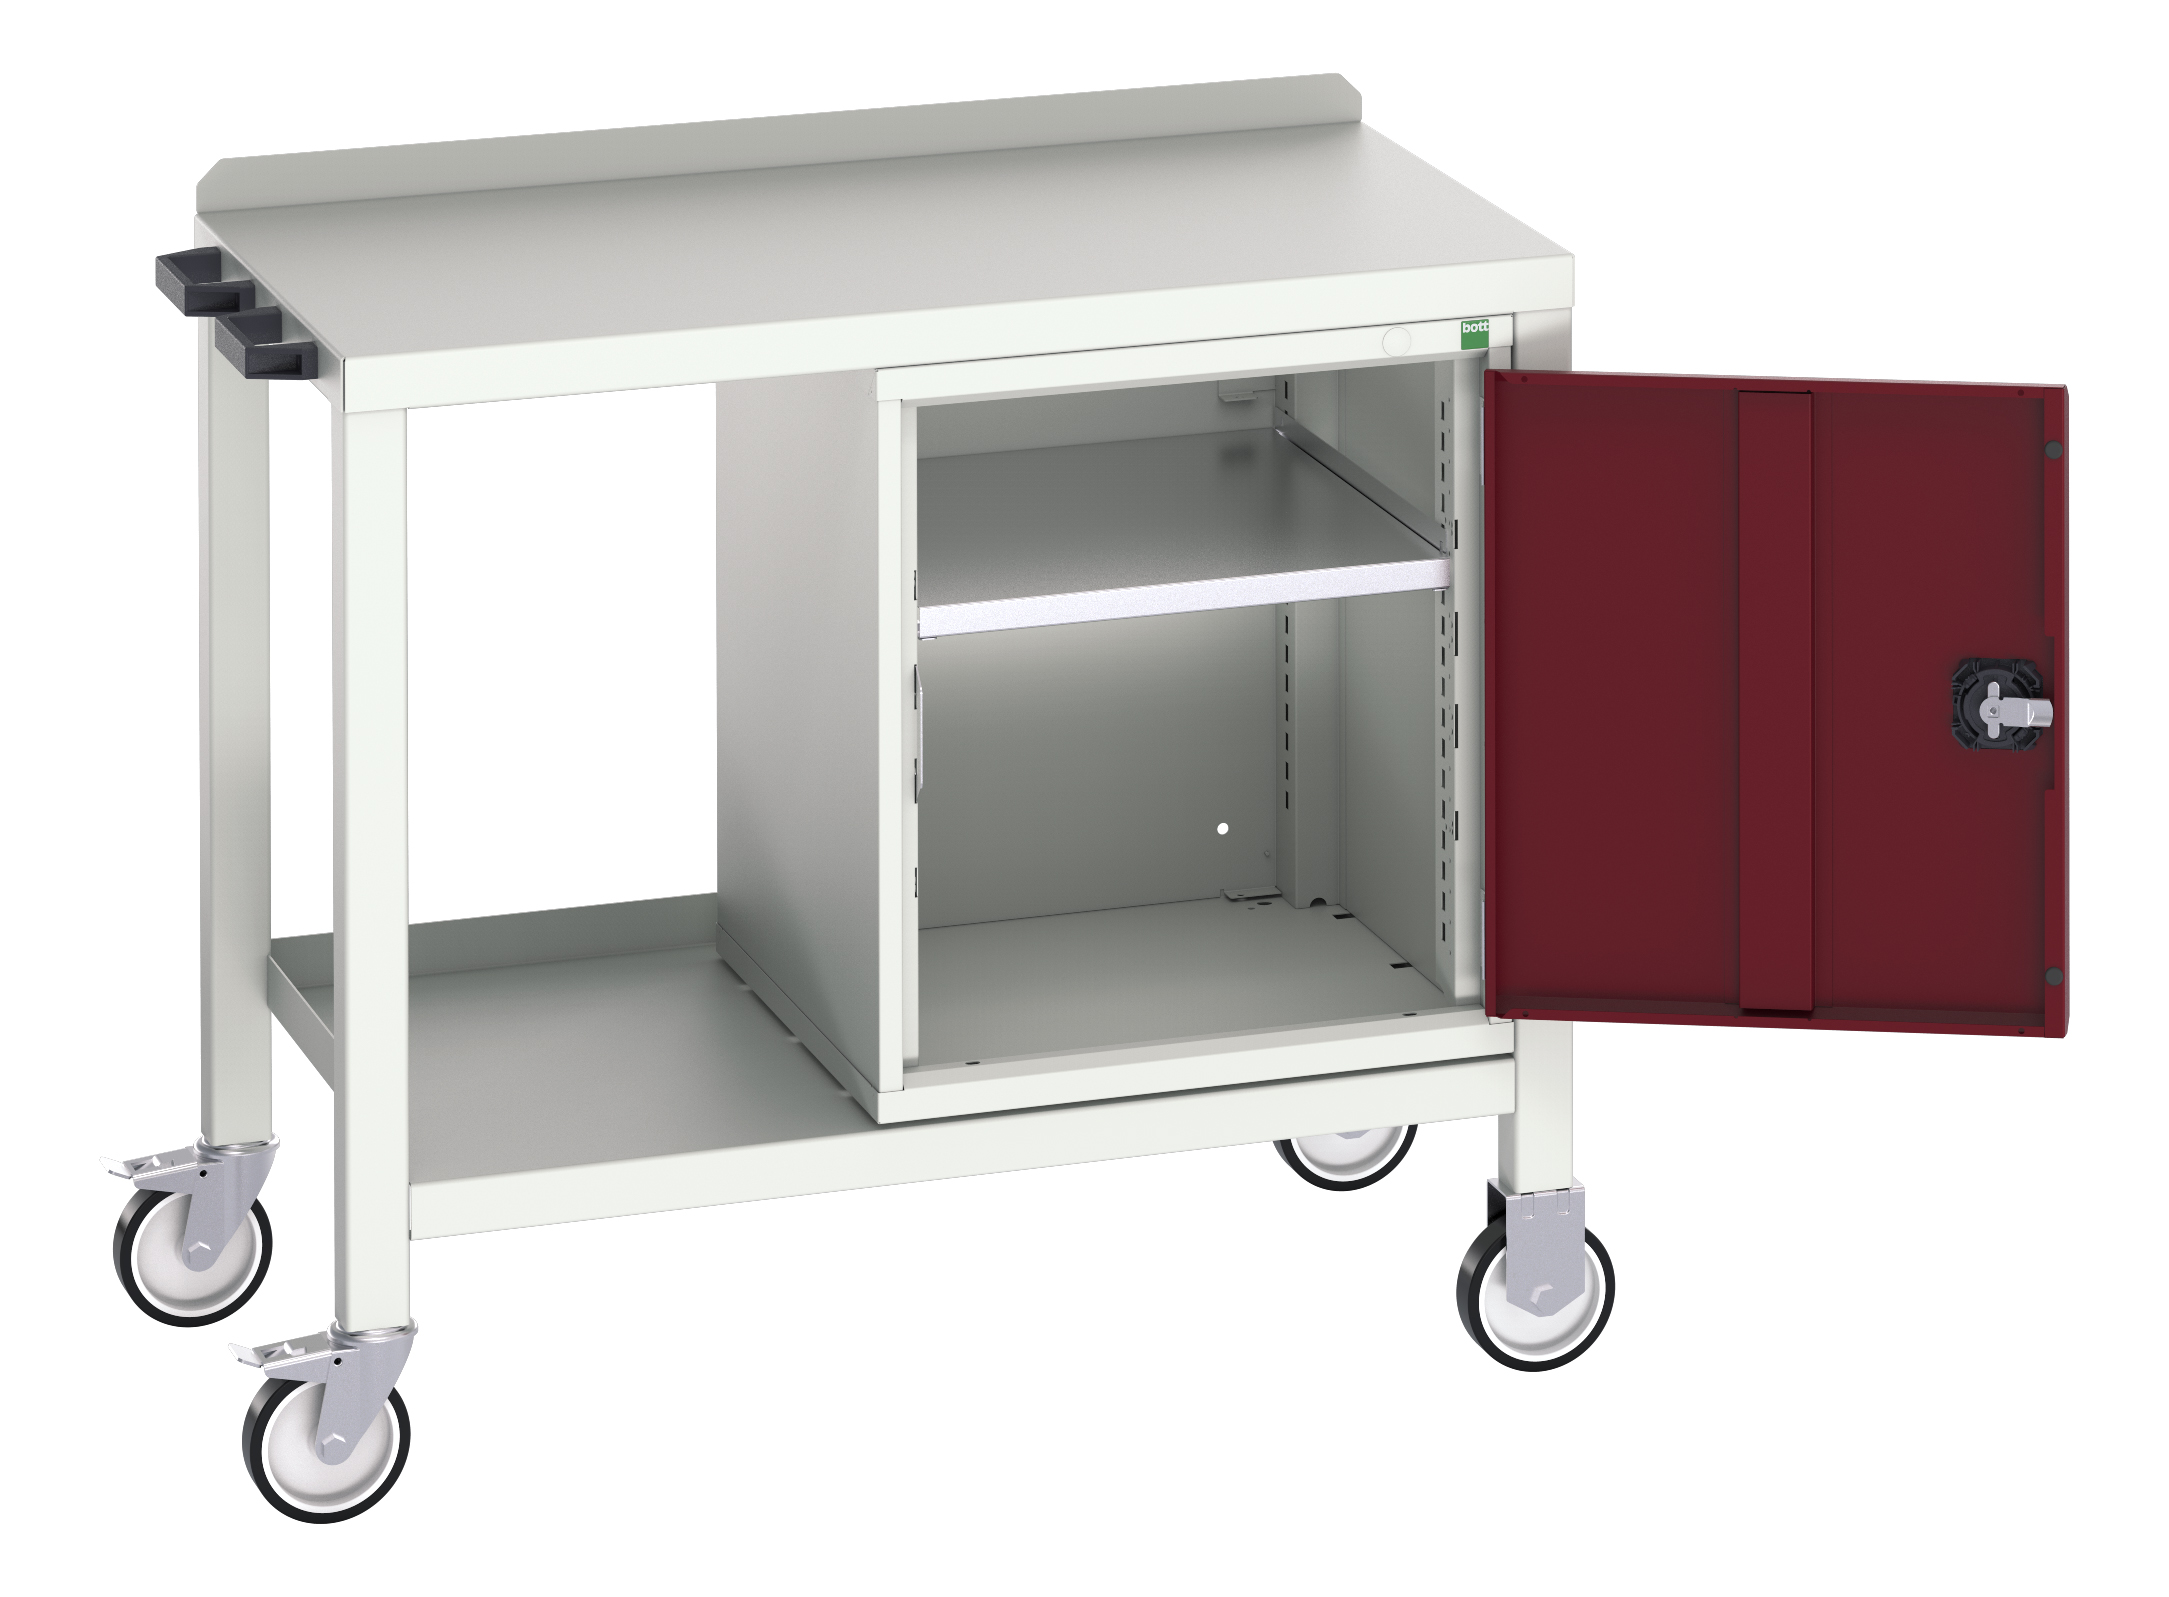 Bott Verso Mobile Welded Bench With Full Cupboard - 16922802.24